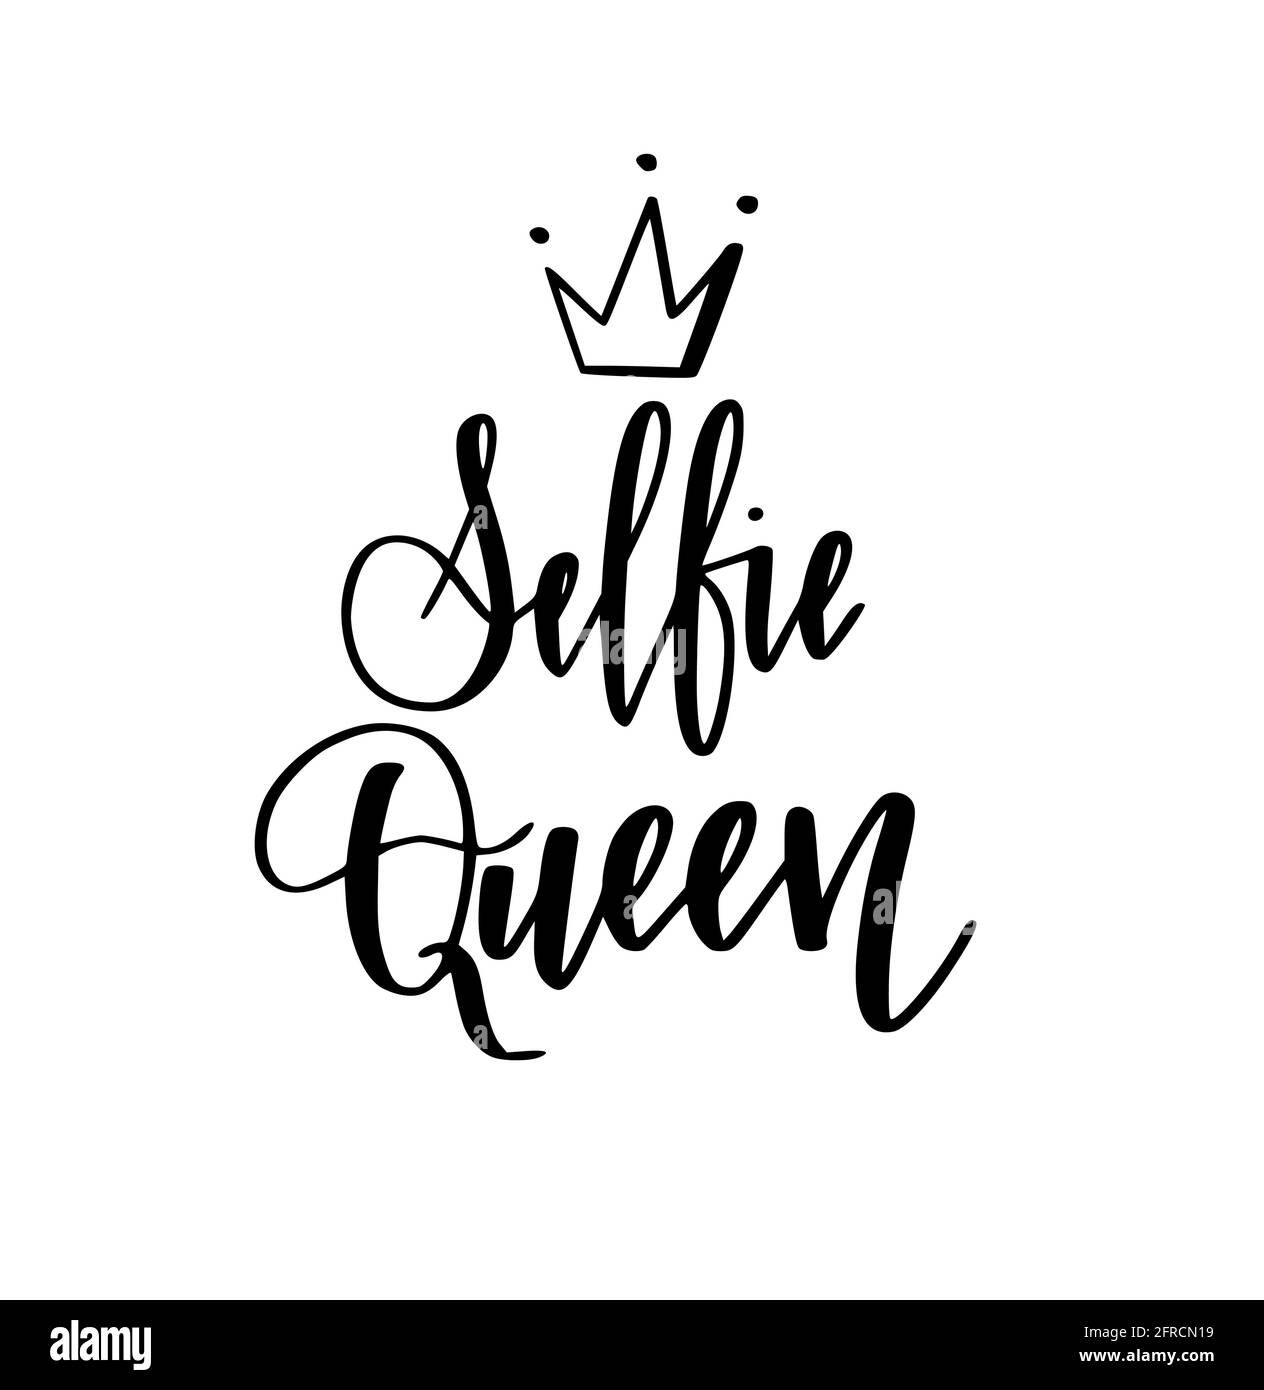 Selfie queen modern calligraphy design for t-shirt prints, phone cases, mugs or posters Stock Vector